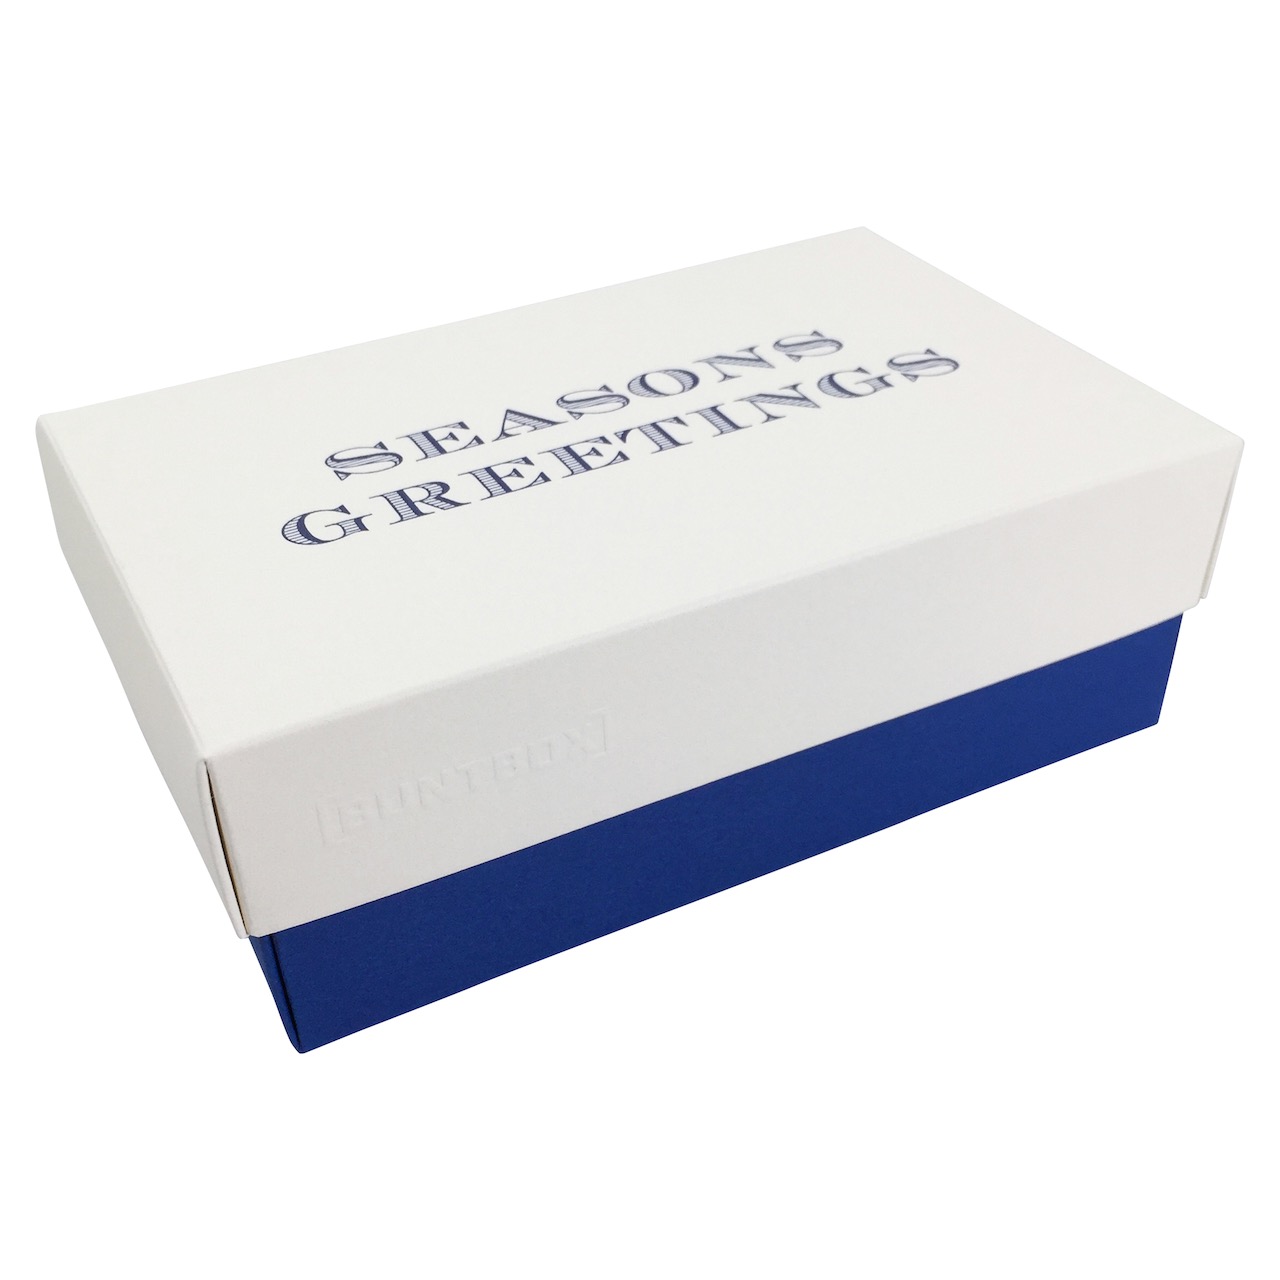 Fine Paper Edition Buntbox Champagne - Bordeaux 'Seasons Greetings' - Red